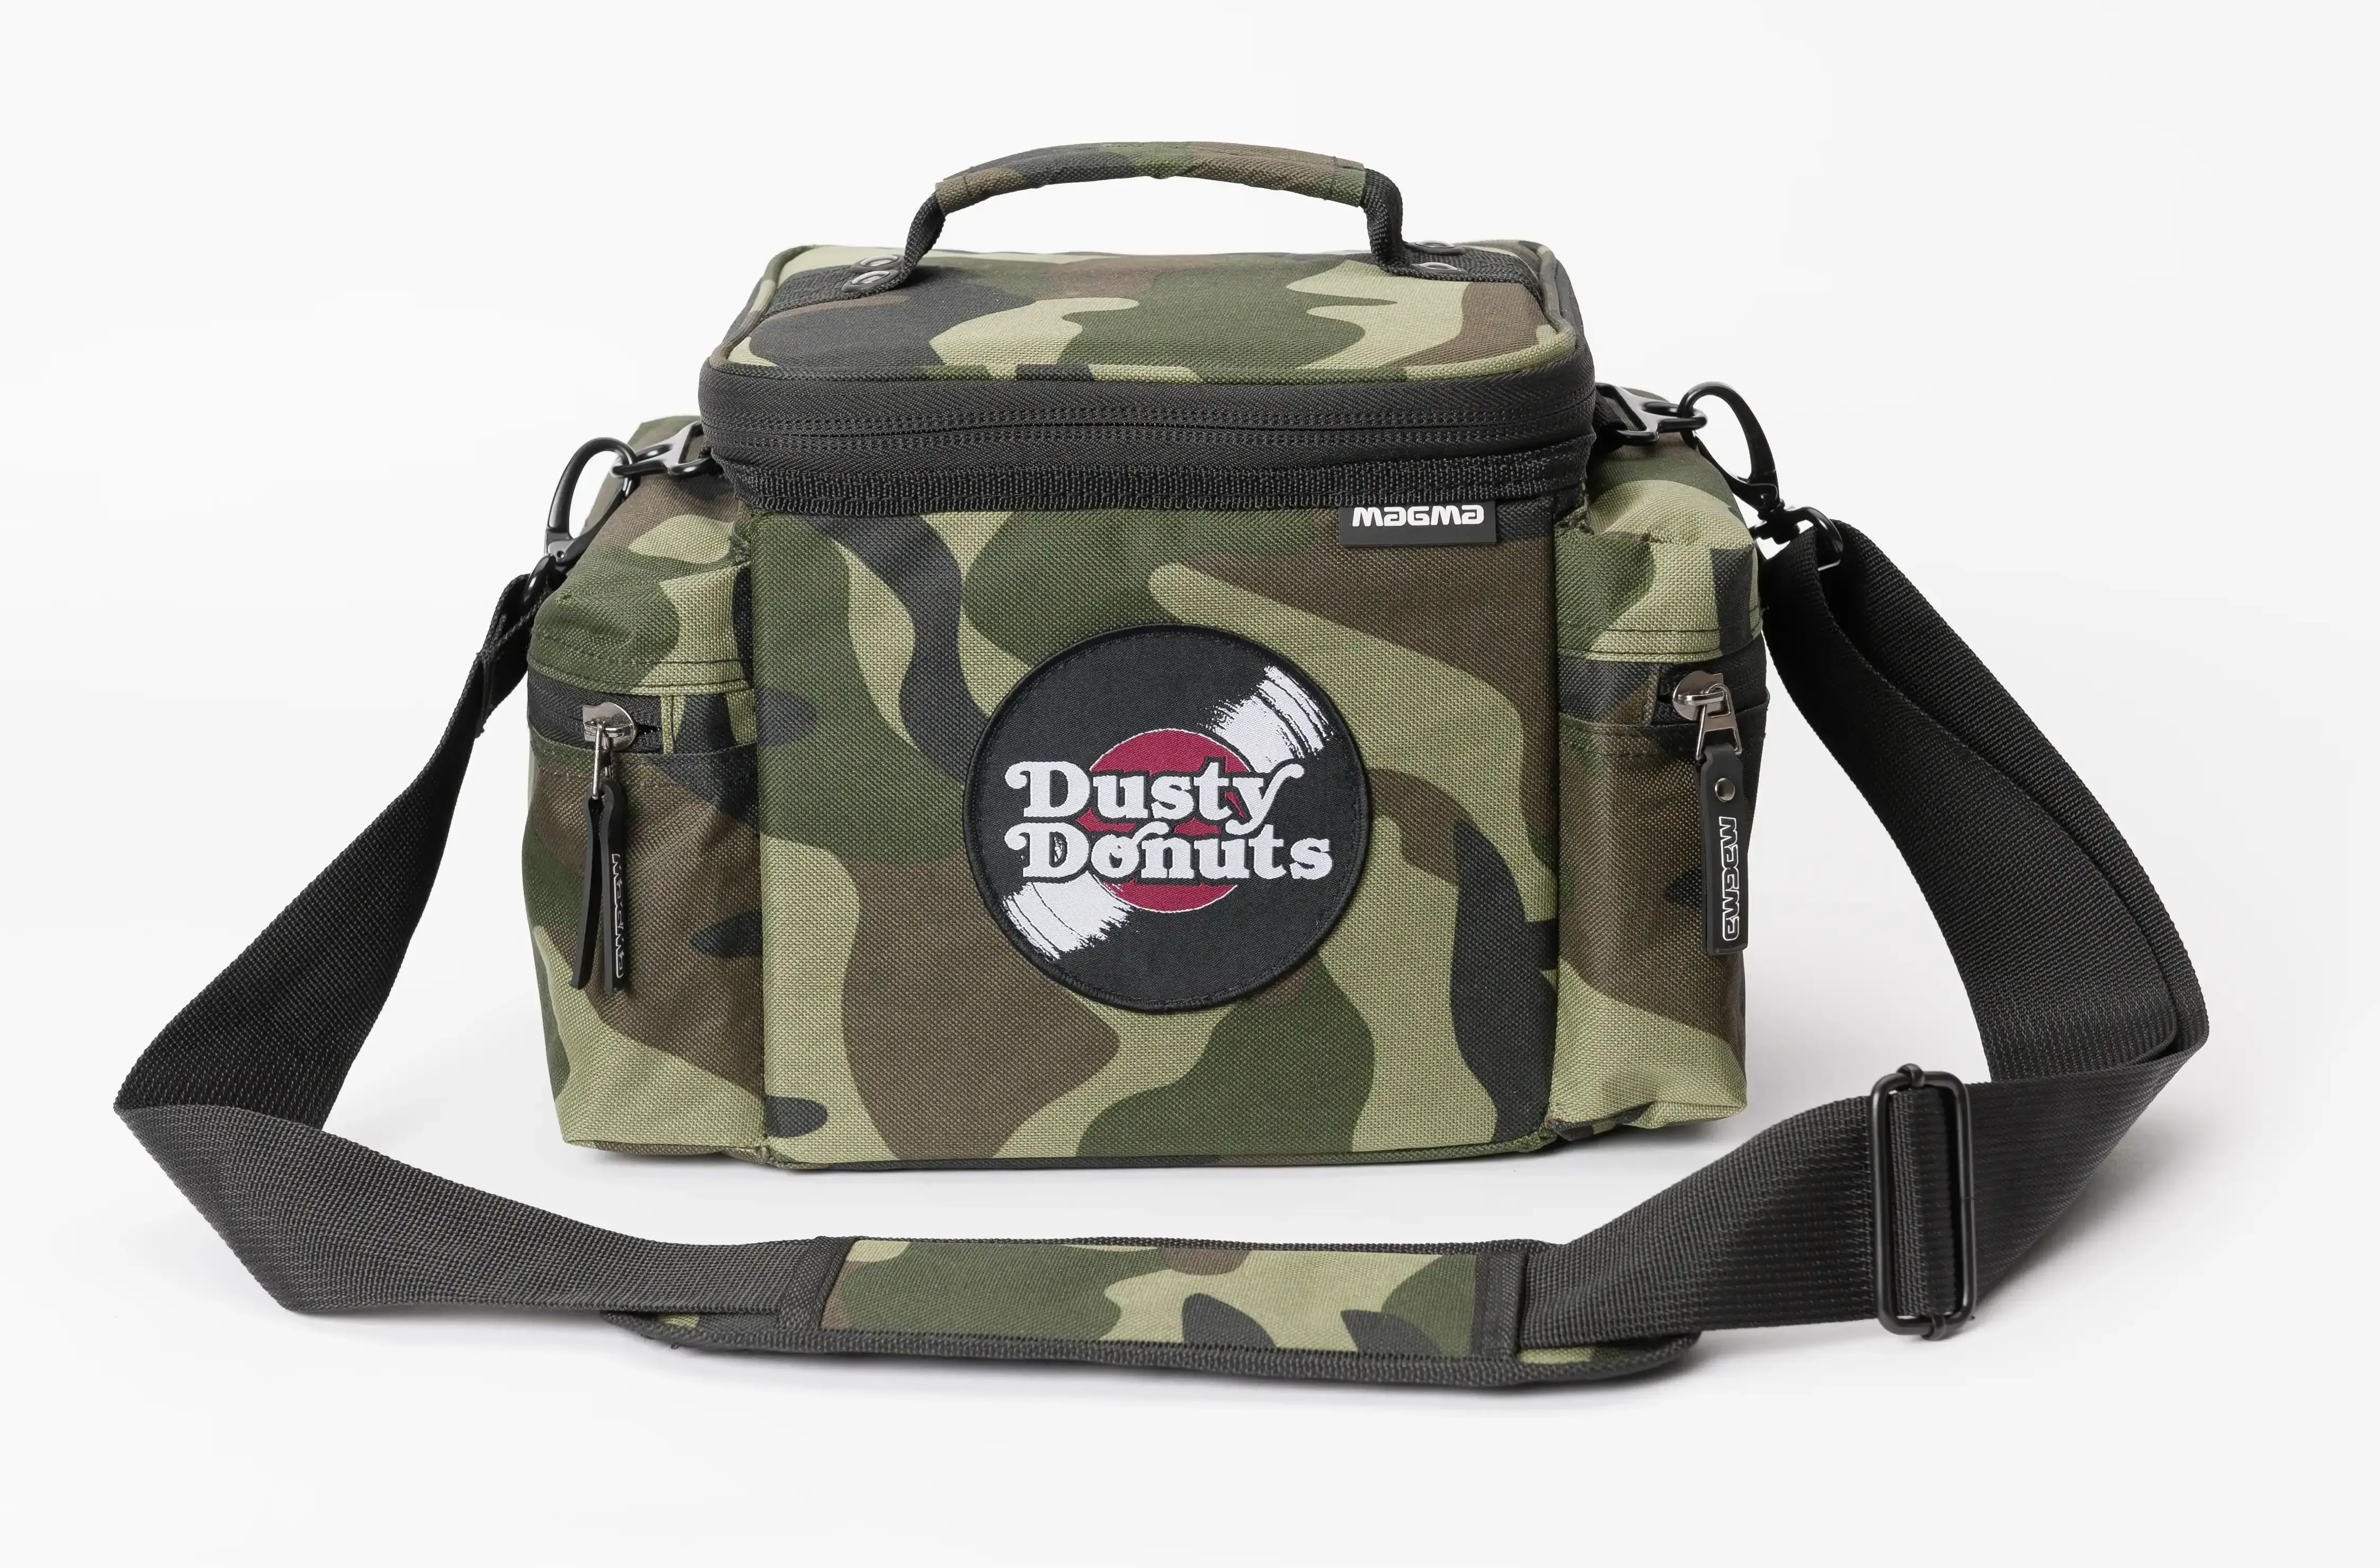 Magma 45 Rec Bag 100 Dusty Donuts Edition Camo Green/Red 